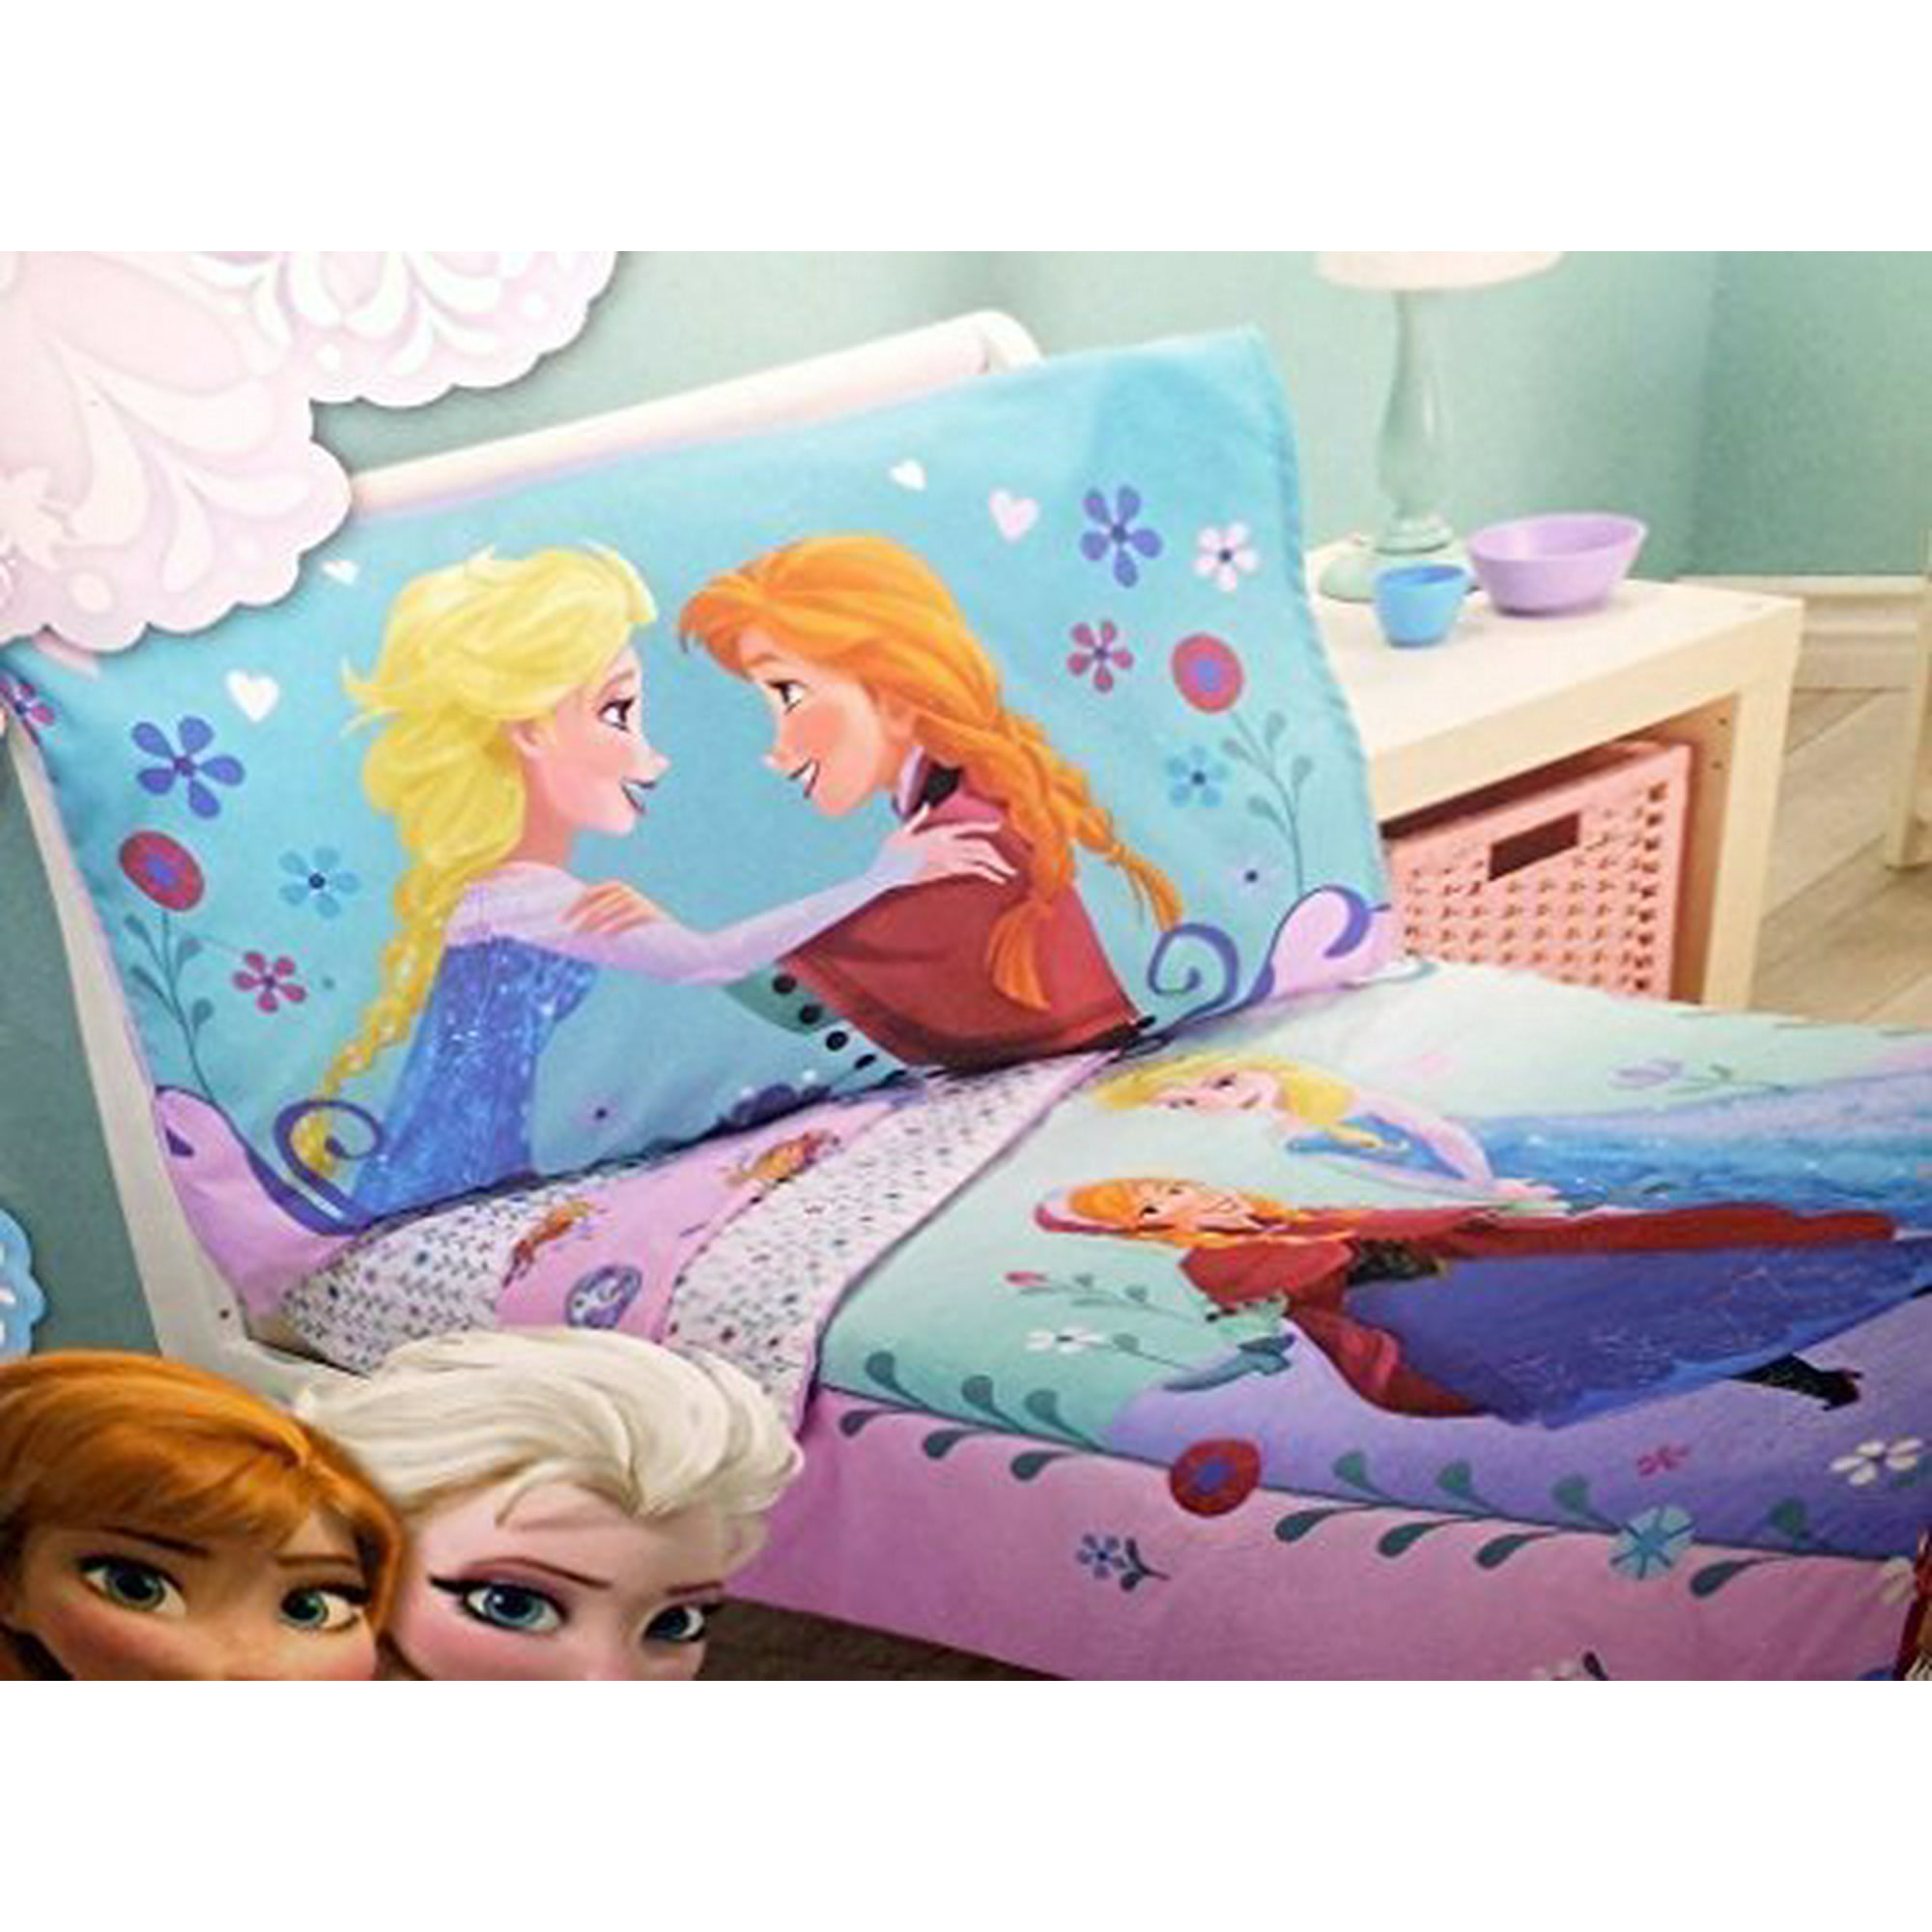 Disney Frozen 4 Piece Toddler Bedding, Twin Sheets Fit Toddler Bed